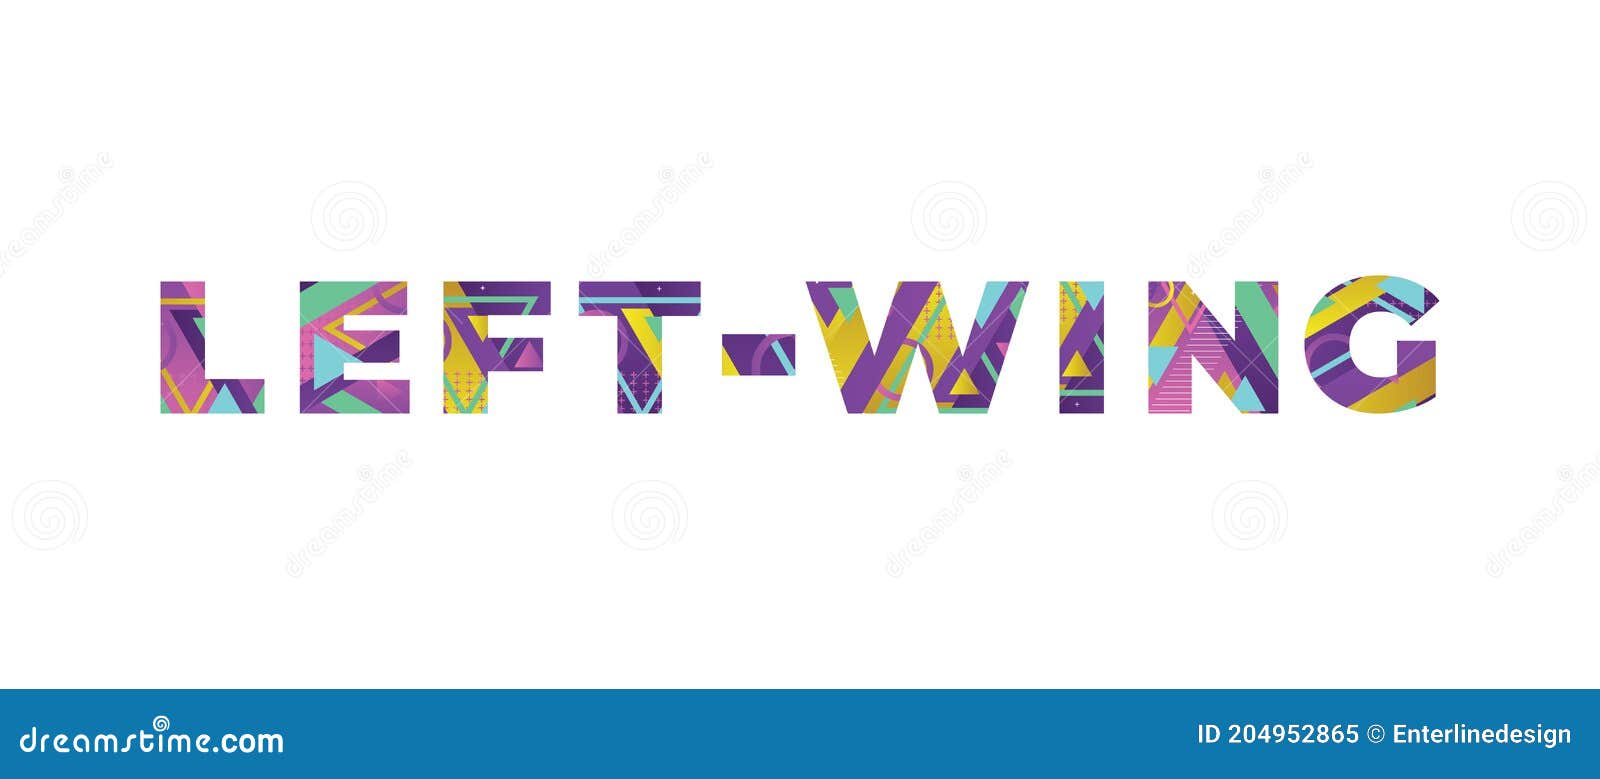 left-wing concept retro colorful word art 